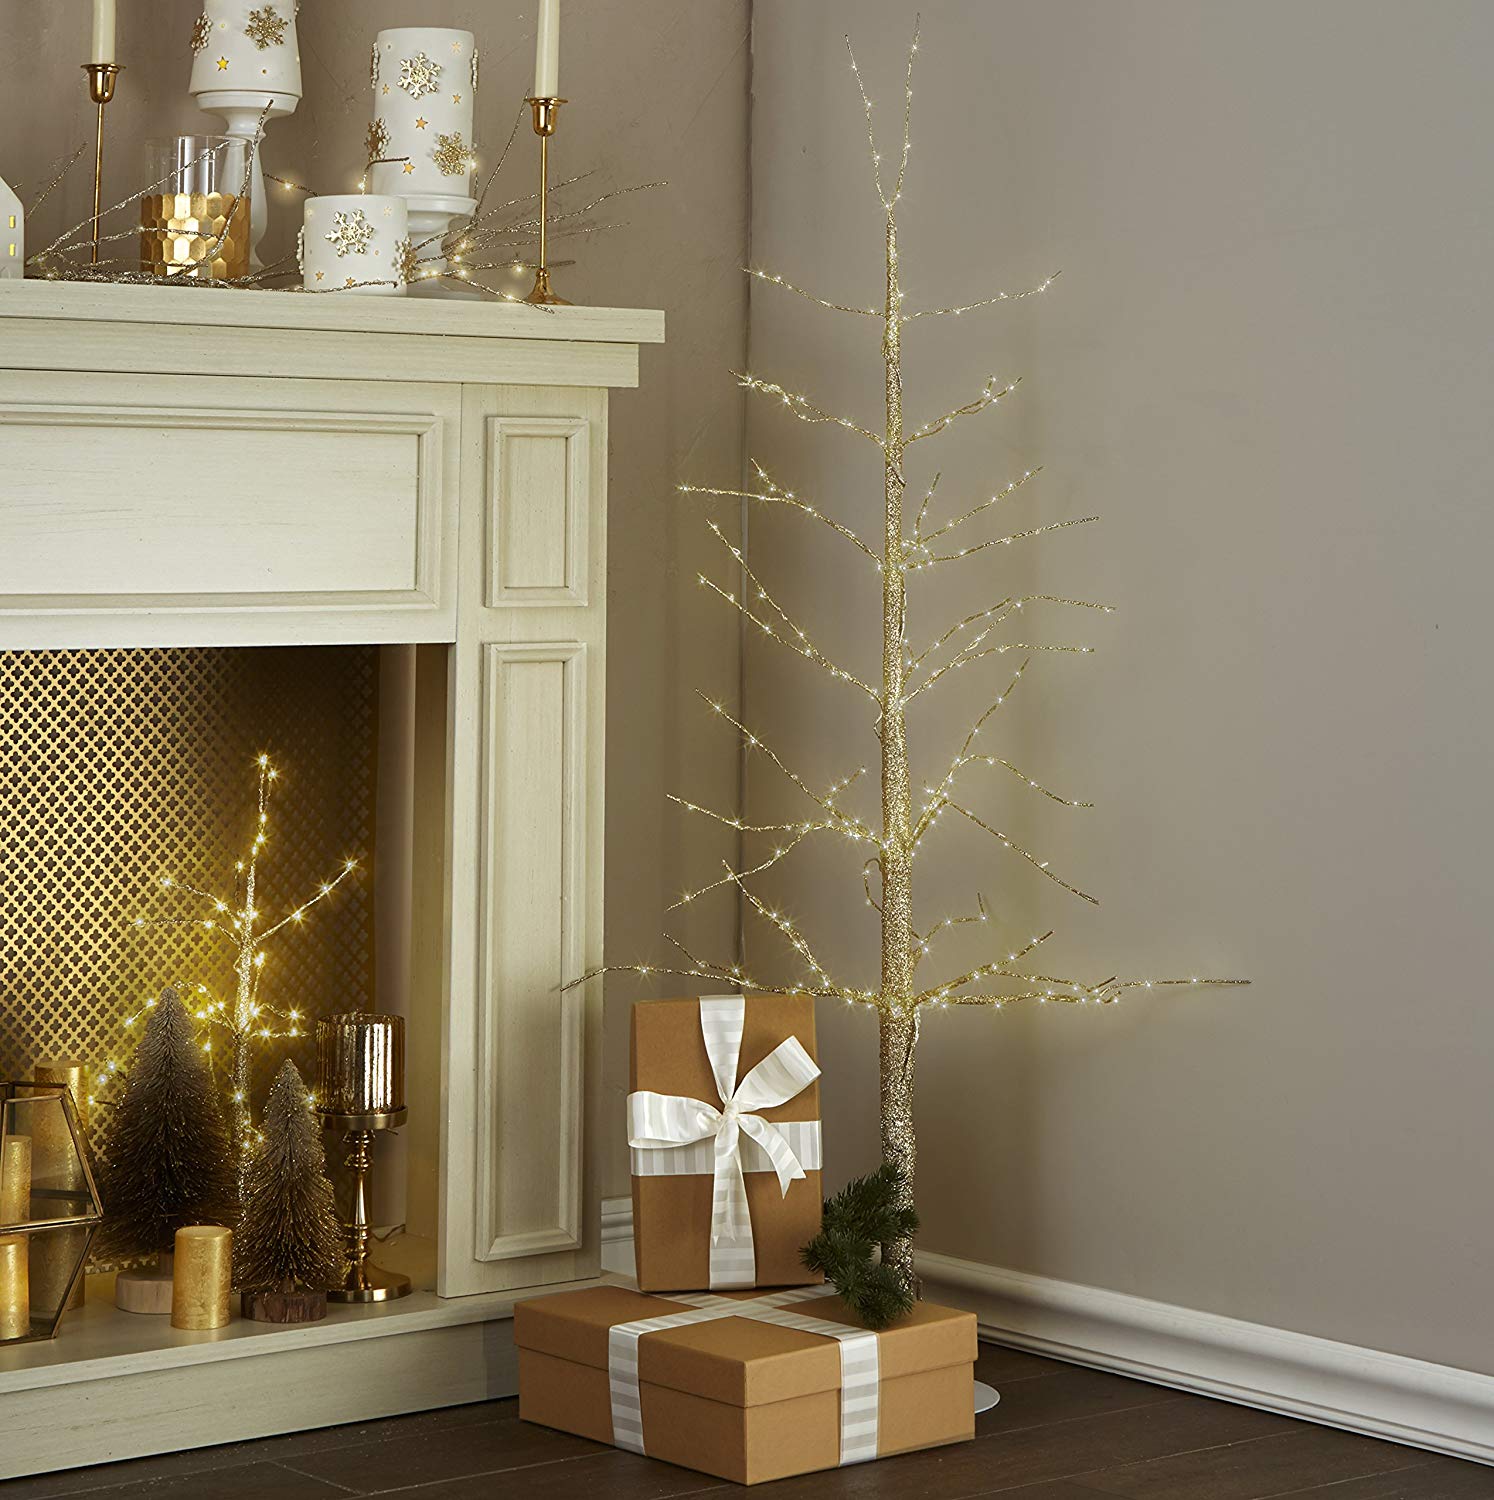 Not a lot of space? Looking for festive impact? This pre-lit tree is perfect!